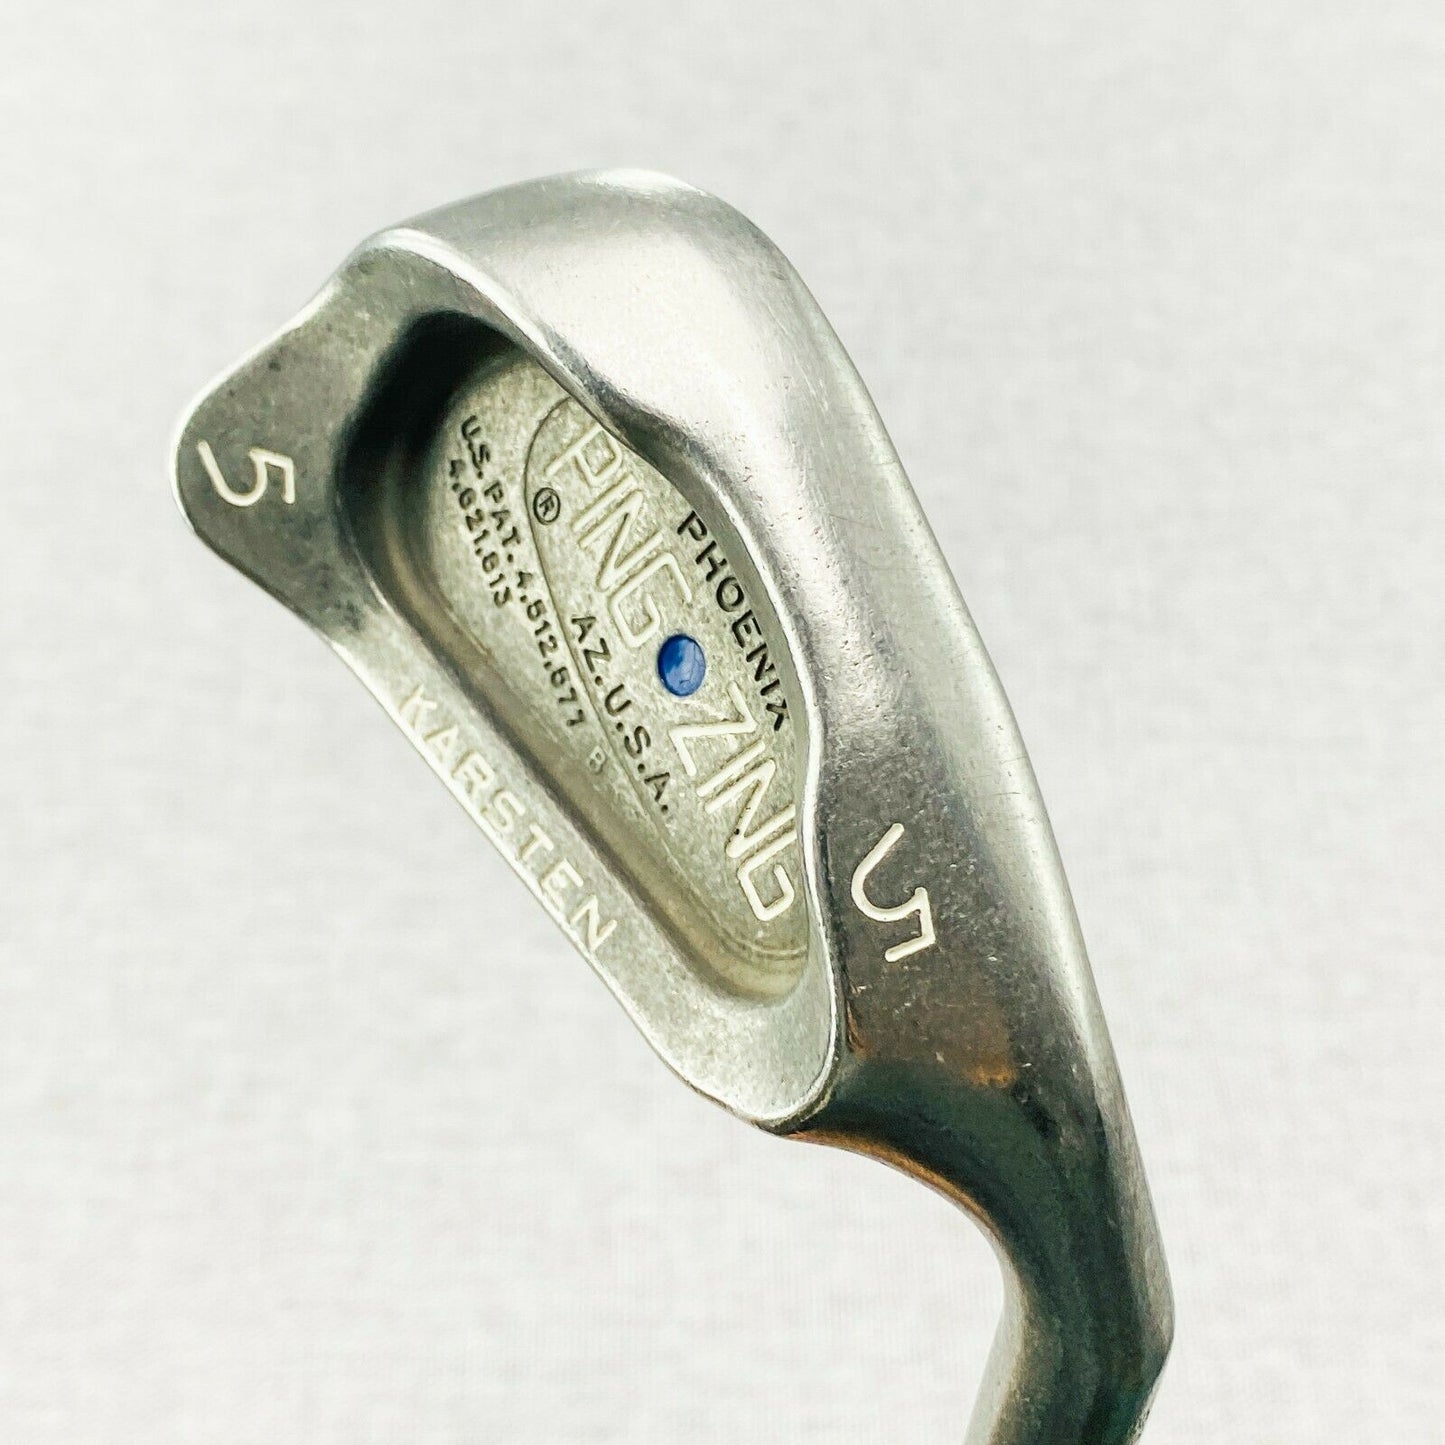 PING Zing Blue-Dot SINGLE Irons. Sold separately! KT-M shaft # 10228